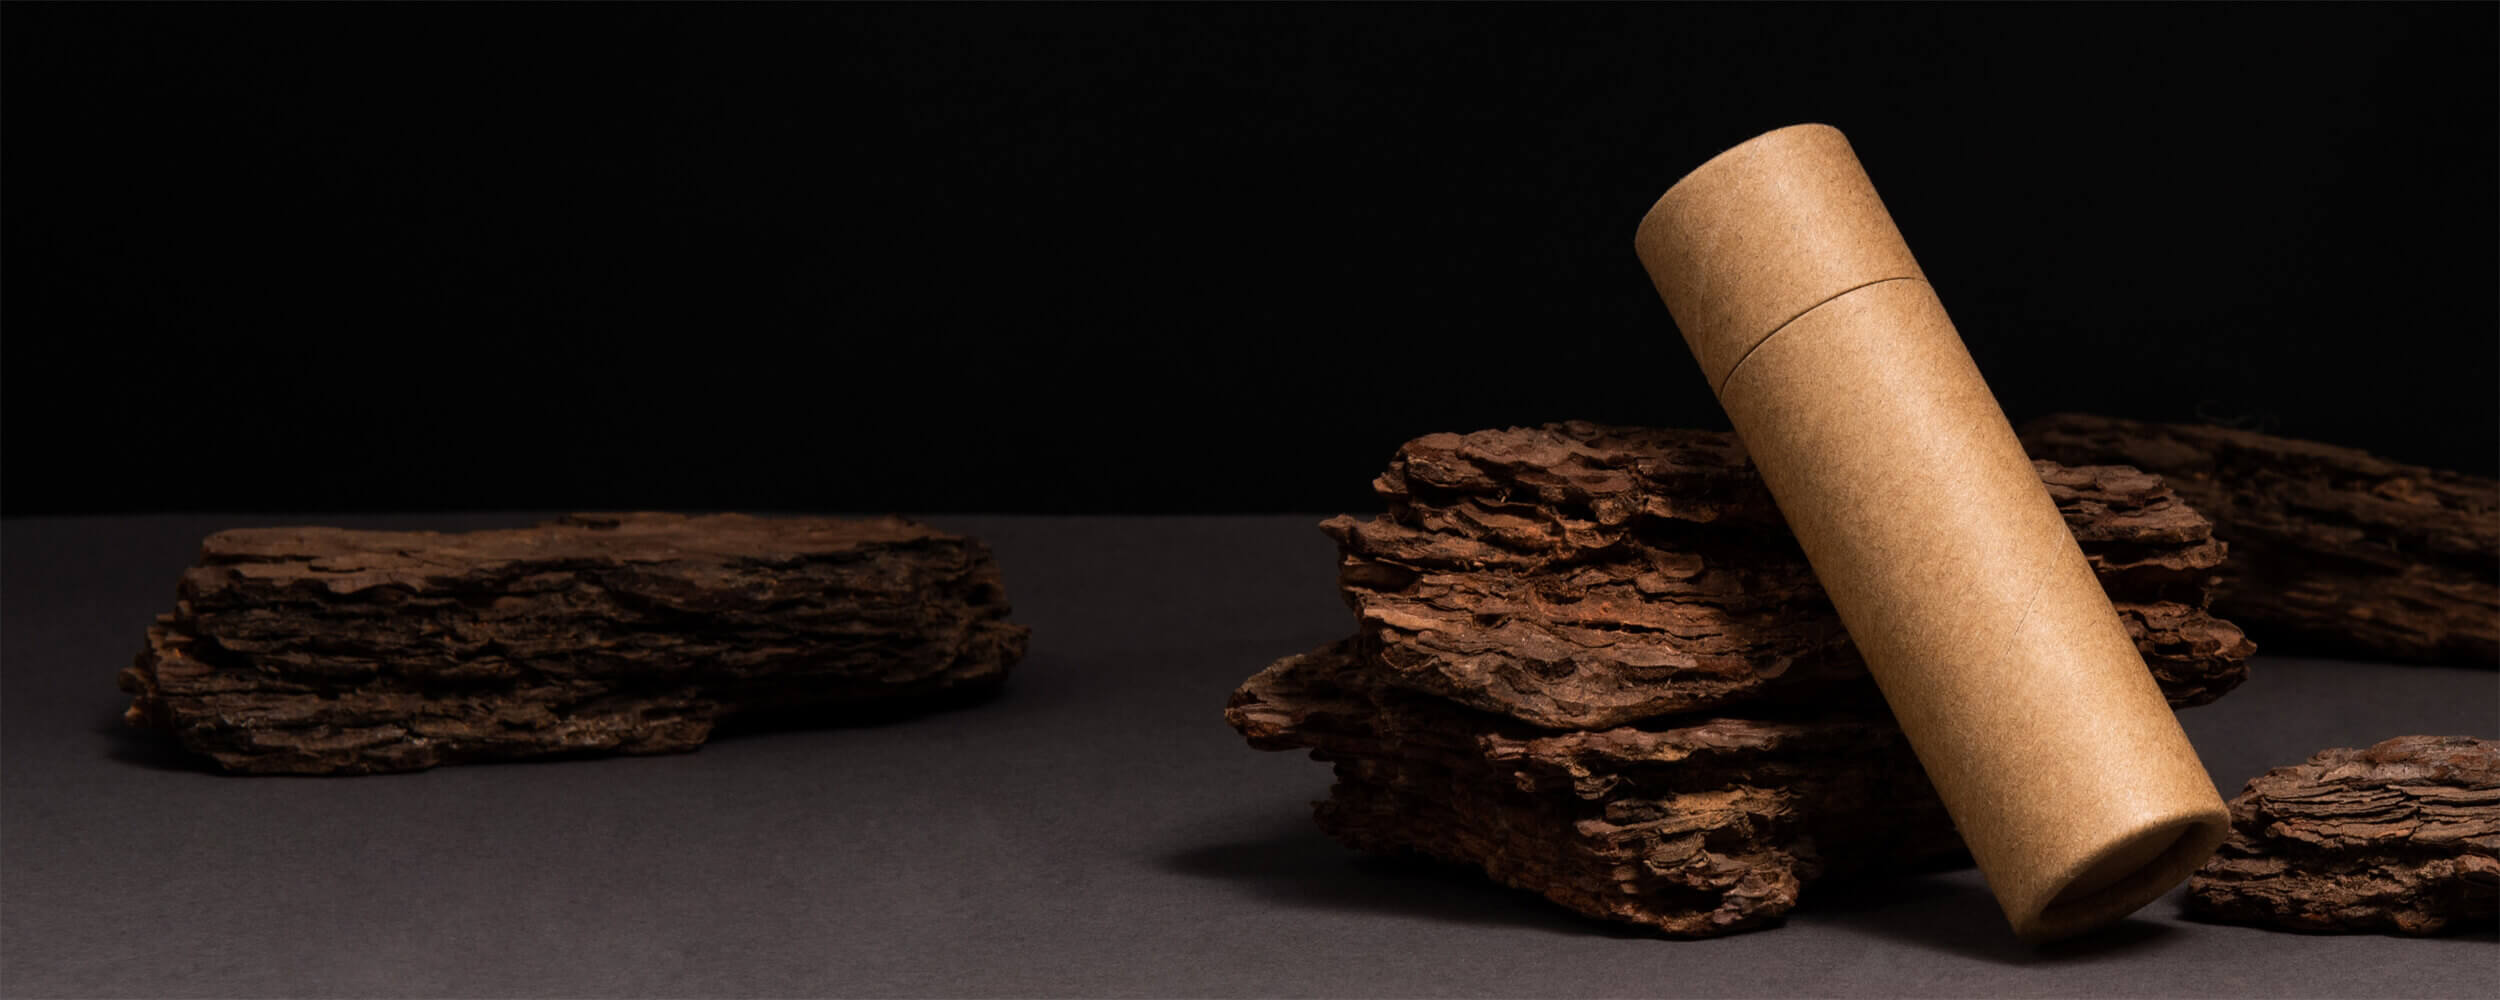 A kraft paper tube lies diagonally across a dark surface, flanked by rugged pieces of bark, creating a stark contrast in textures and a rustic aesthetic.